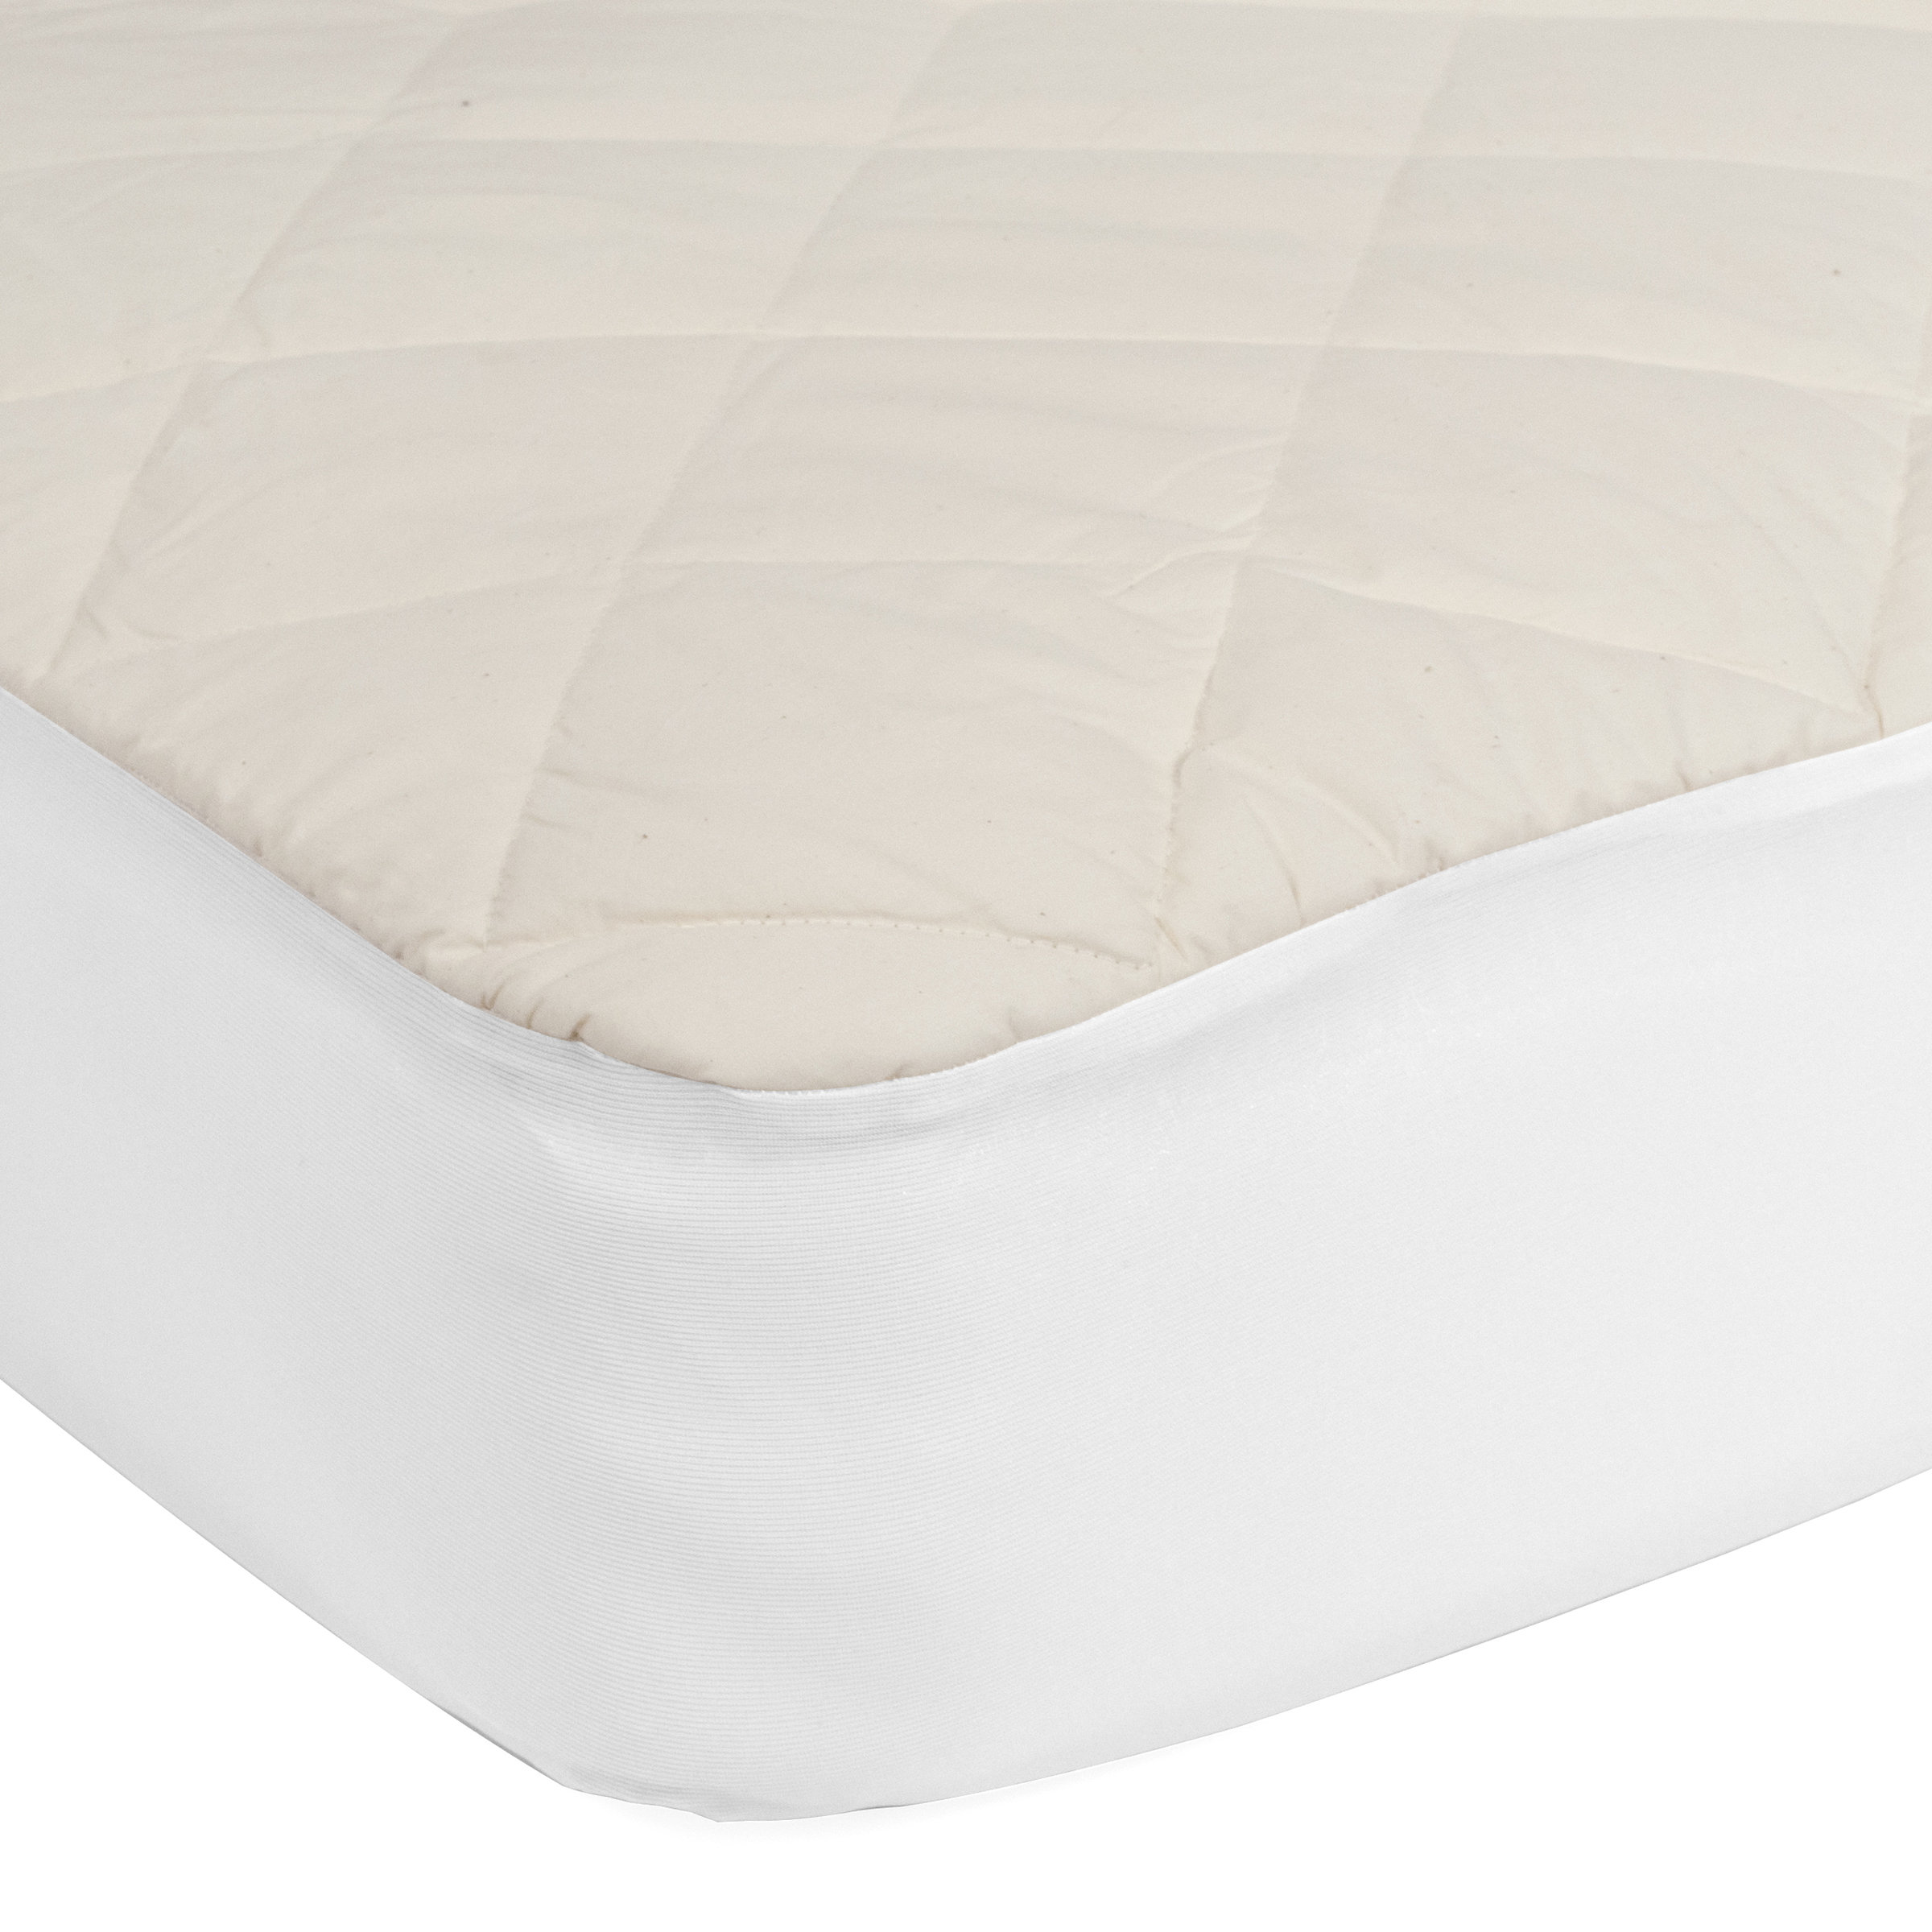 Sealy Total Stain Protection Fitted Crib Mattress Pad